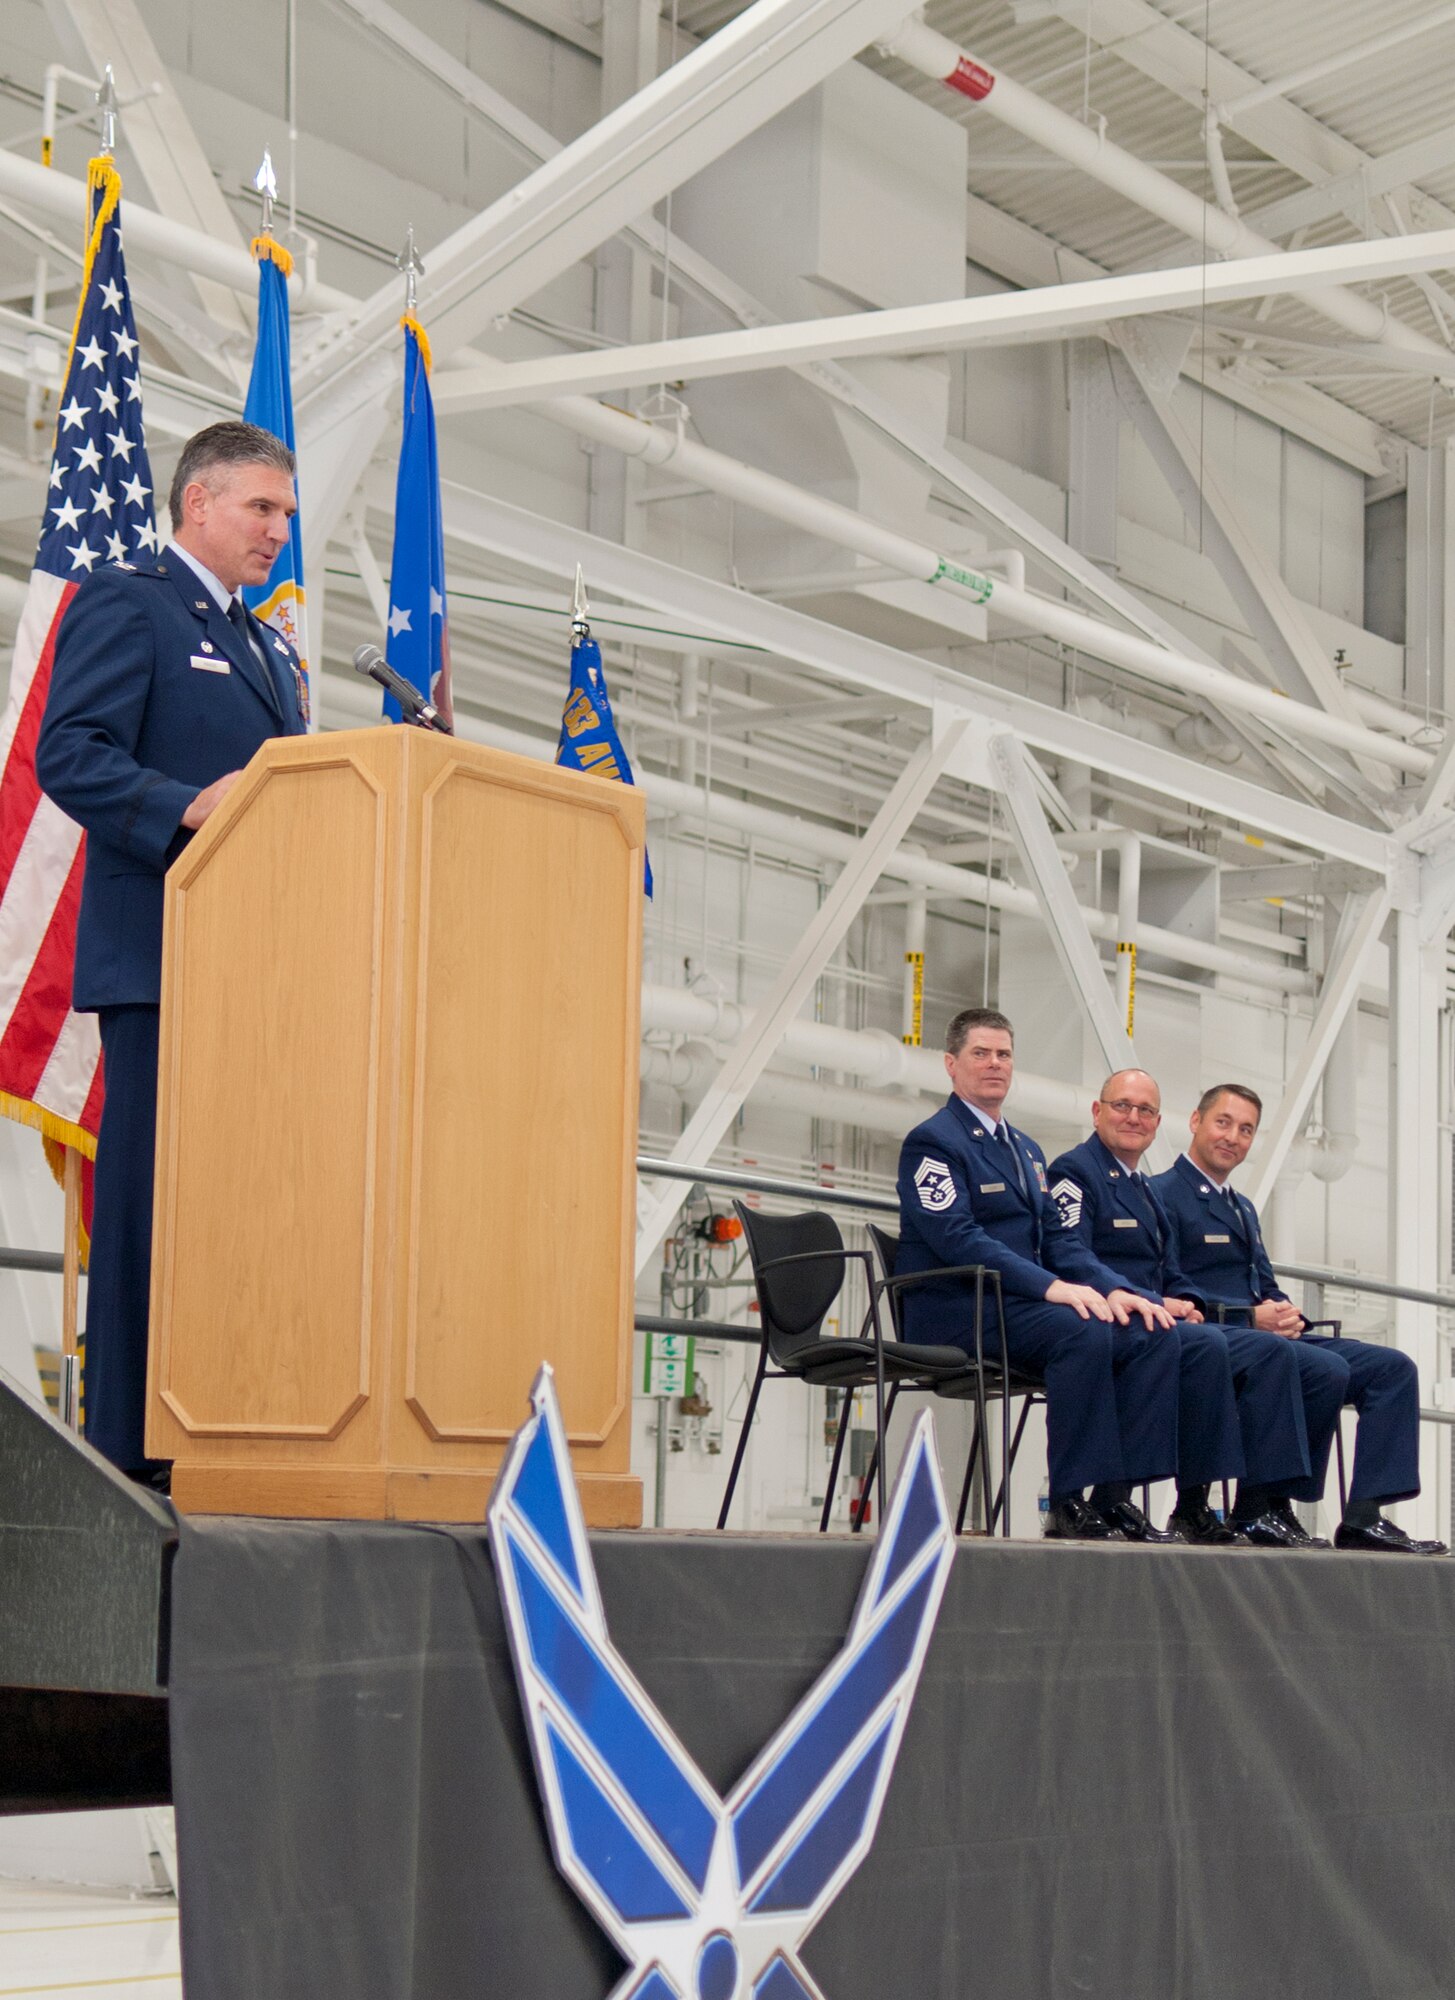 Col. Greg Haase (left), 133rd Airlift Wing commander applauds the work of outgoing Wing command chief, Chief Master Sgt. David Speich (2nd from right), 133rd Civil Engineer Squadron, and introduces his new top enlisted member for the 133rd AW, Chief Master Sgt. Paul Kessler (far right), 133rd Communications Flight, during a change of authority ceremony at the Air Guard base in St. Paul, Minn. on Oct. 15, 2011. Minnesota Air National Guard command chief, Chief Master Sgt. Greg Close (2nd from left) assists. USAF official photo by Airman 1st Class Kari Giles